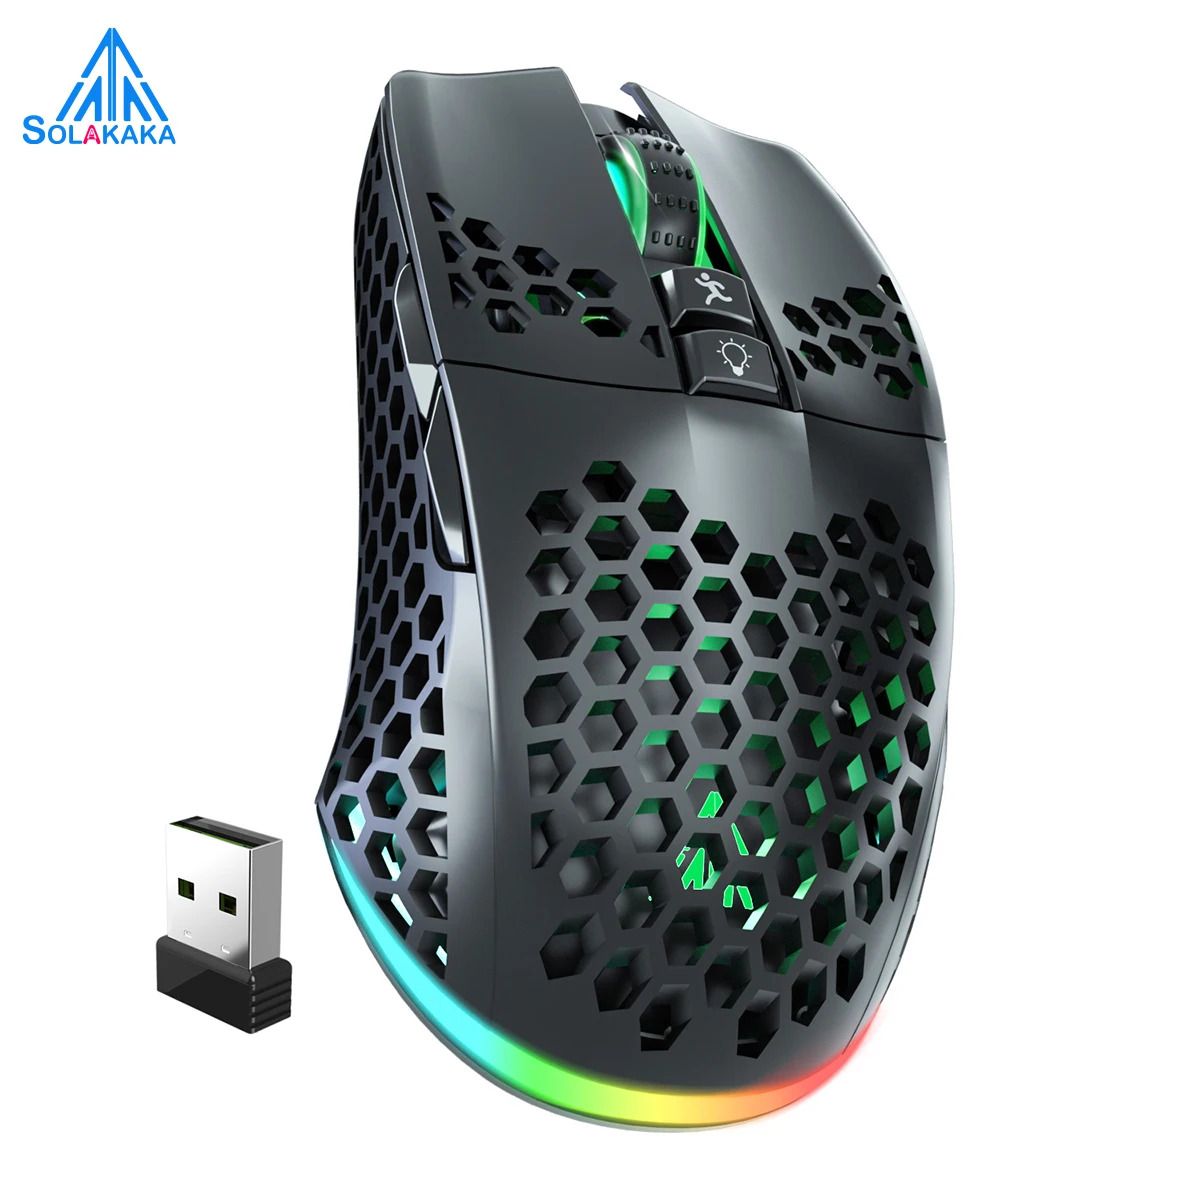 SOLAKAKA SM600 Bluetooth 5.0 Wireless Mouse 2.4G DPI 3200 Gaming Mouse RGB Mouse for Laptop Office Gaming Desktop